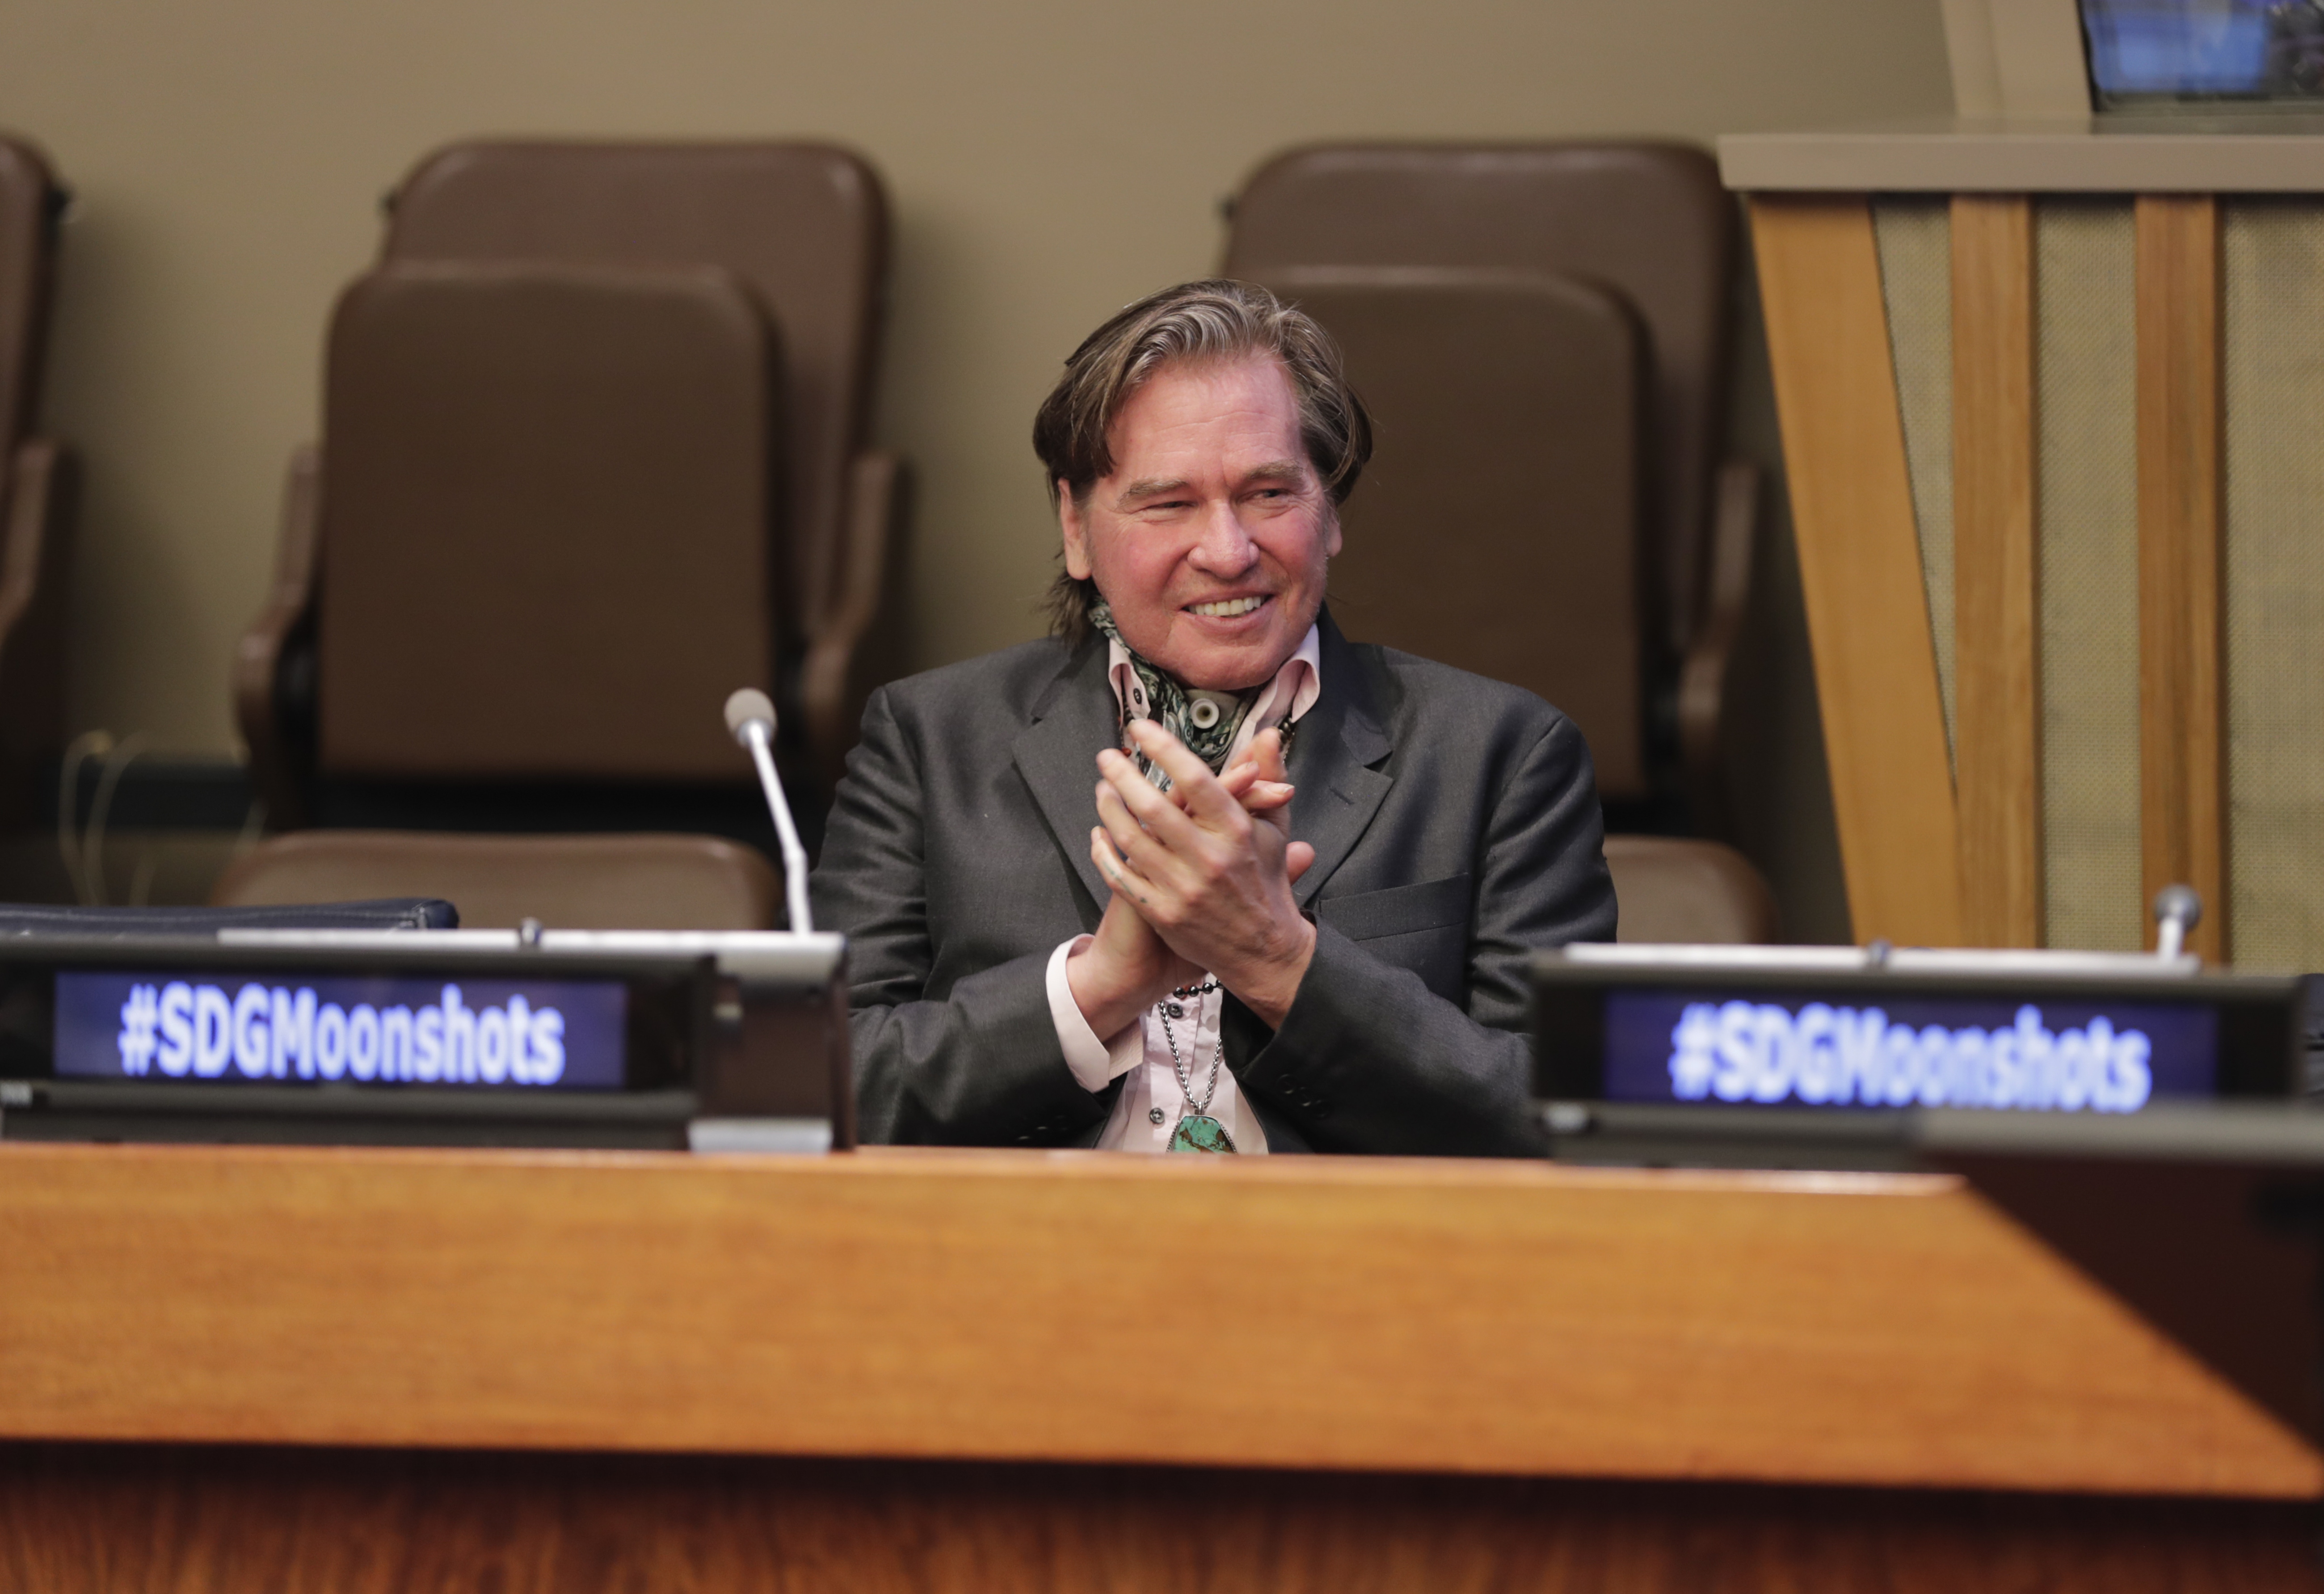 Val Kilmer visits the United Nations headquarters in New York City to promote the 17 Sustainable Development Goals (SDGs) initiative, July 20, 2019. | Source: Getty Images